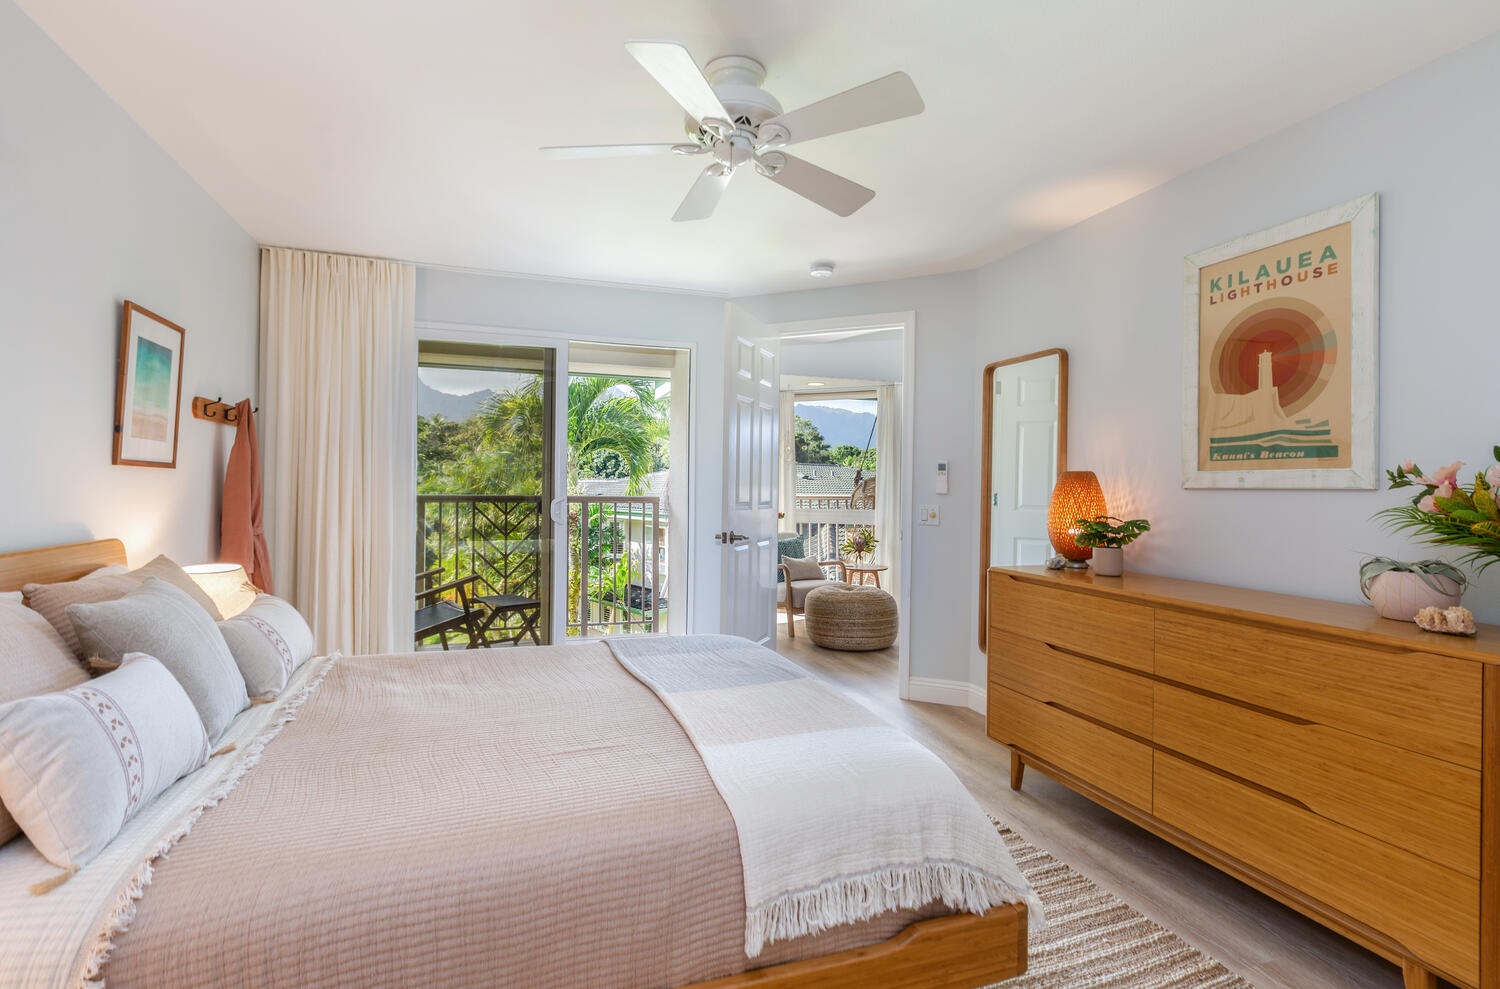 Princeville Vacation Rentals, Sea Glass - With a private lanai to witness the scenic outdoors.